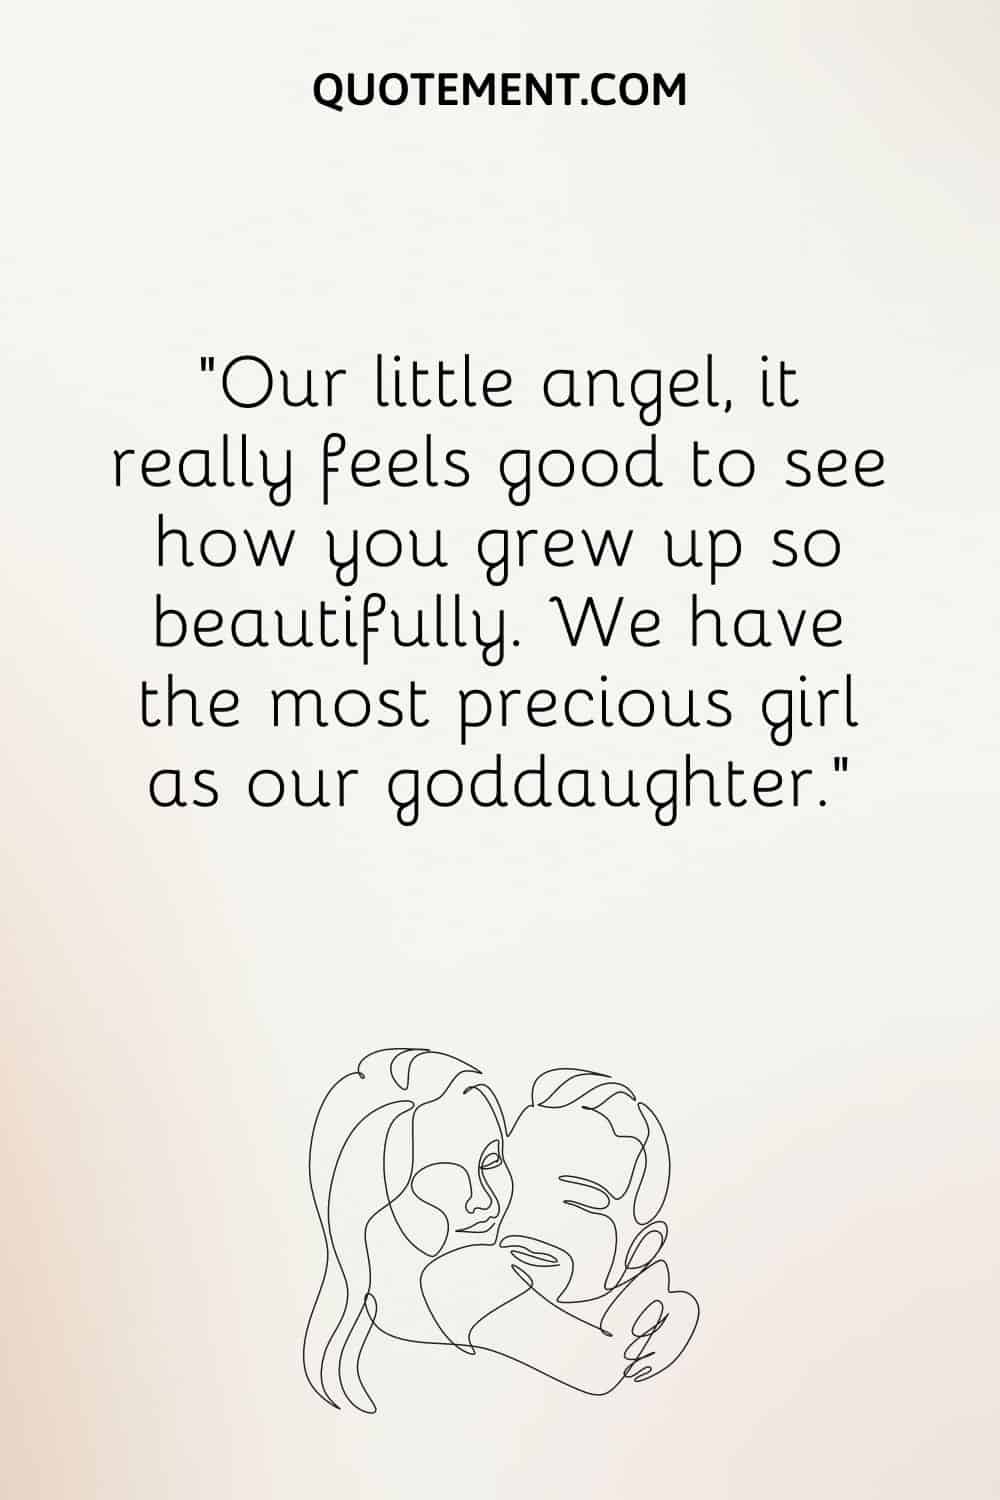 “Our little angel, it really feels good to see how you grew up so beautifully. We have the most precious girl as our goddaughter.”